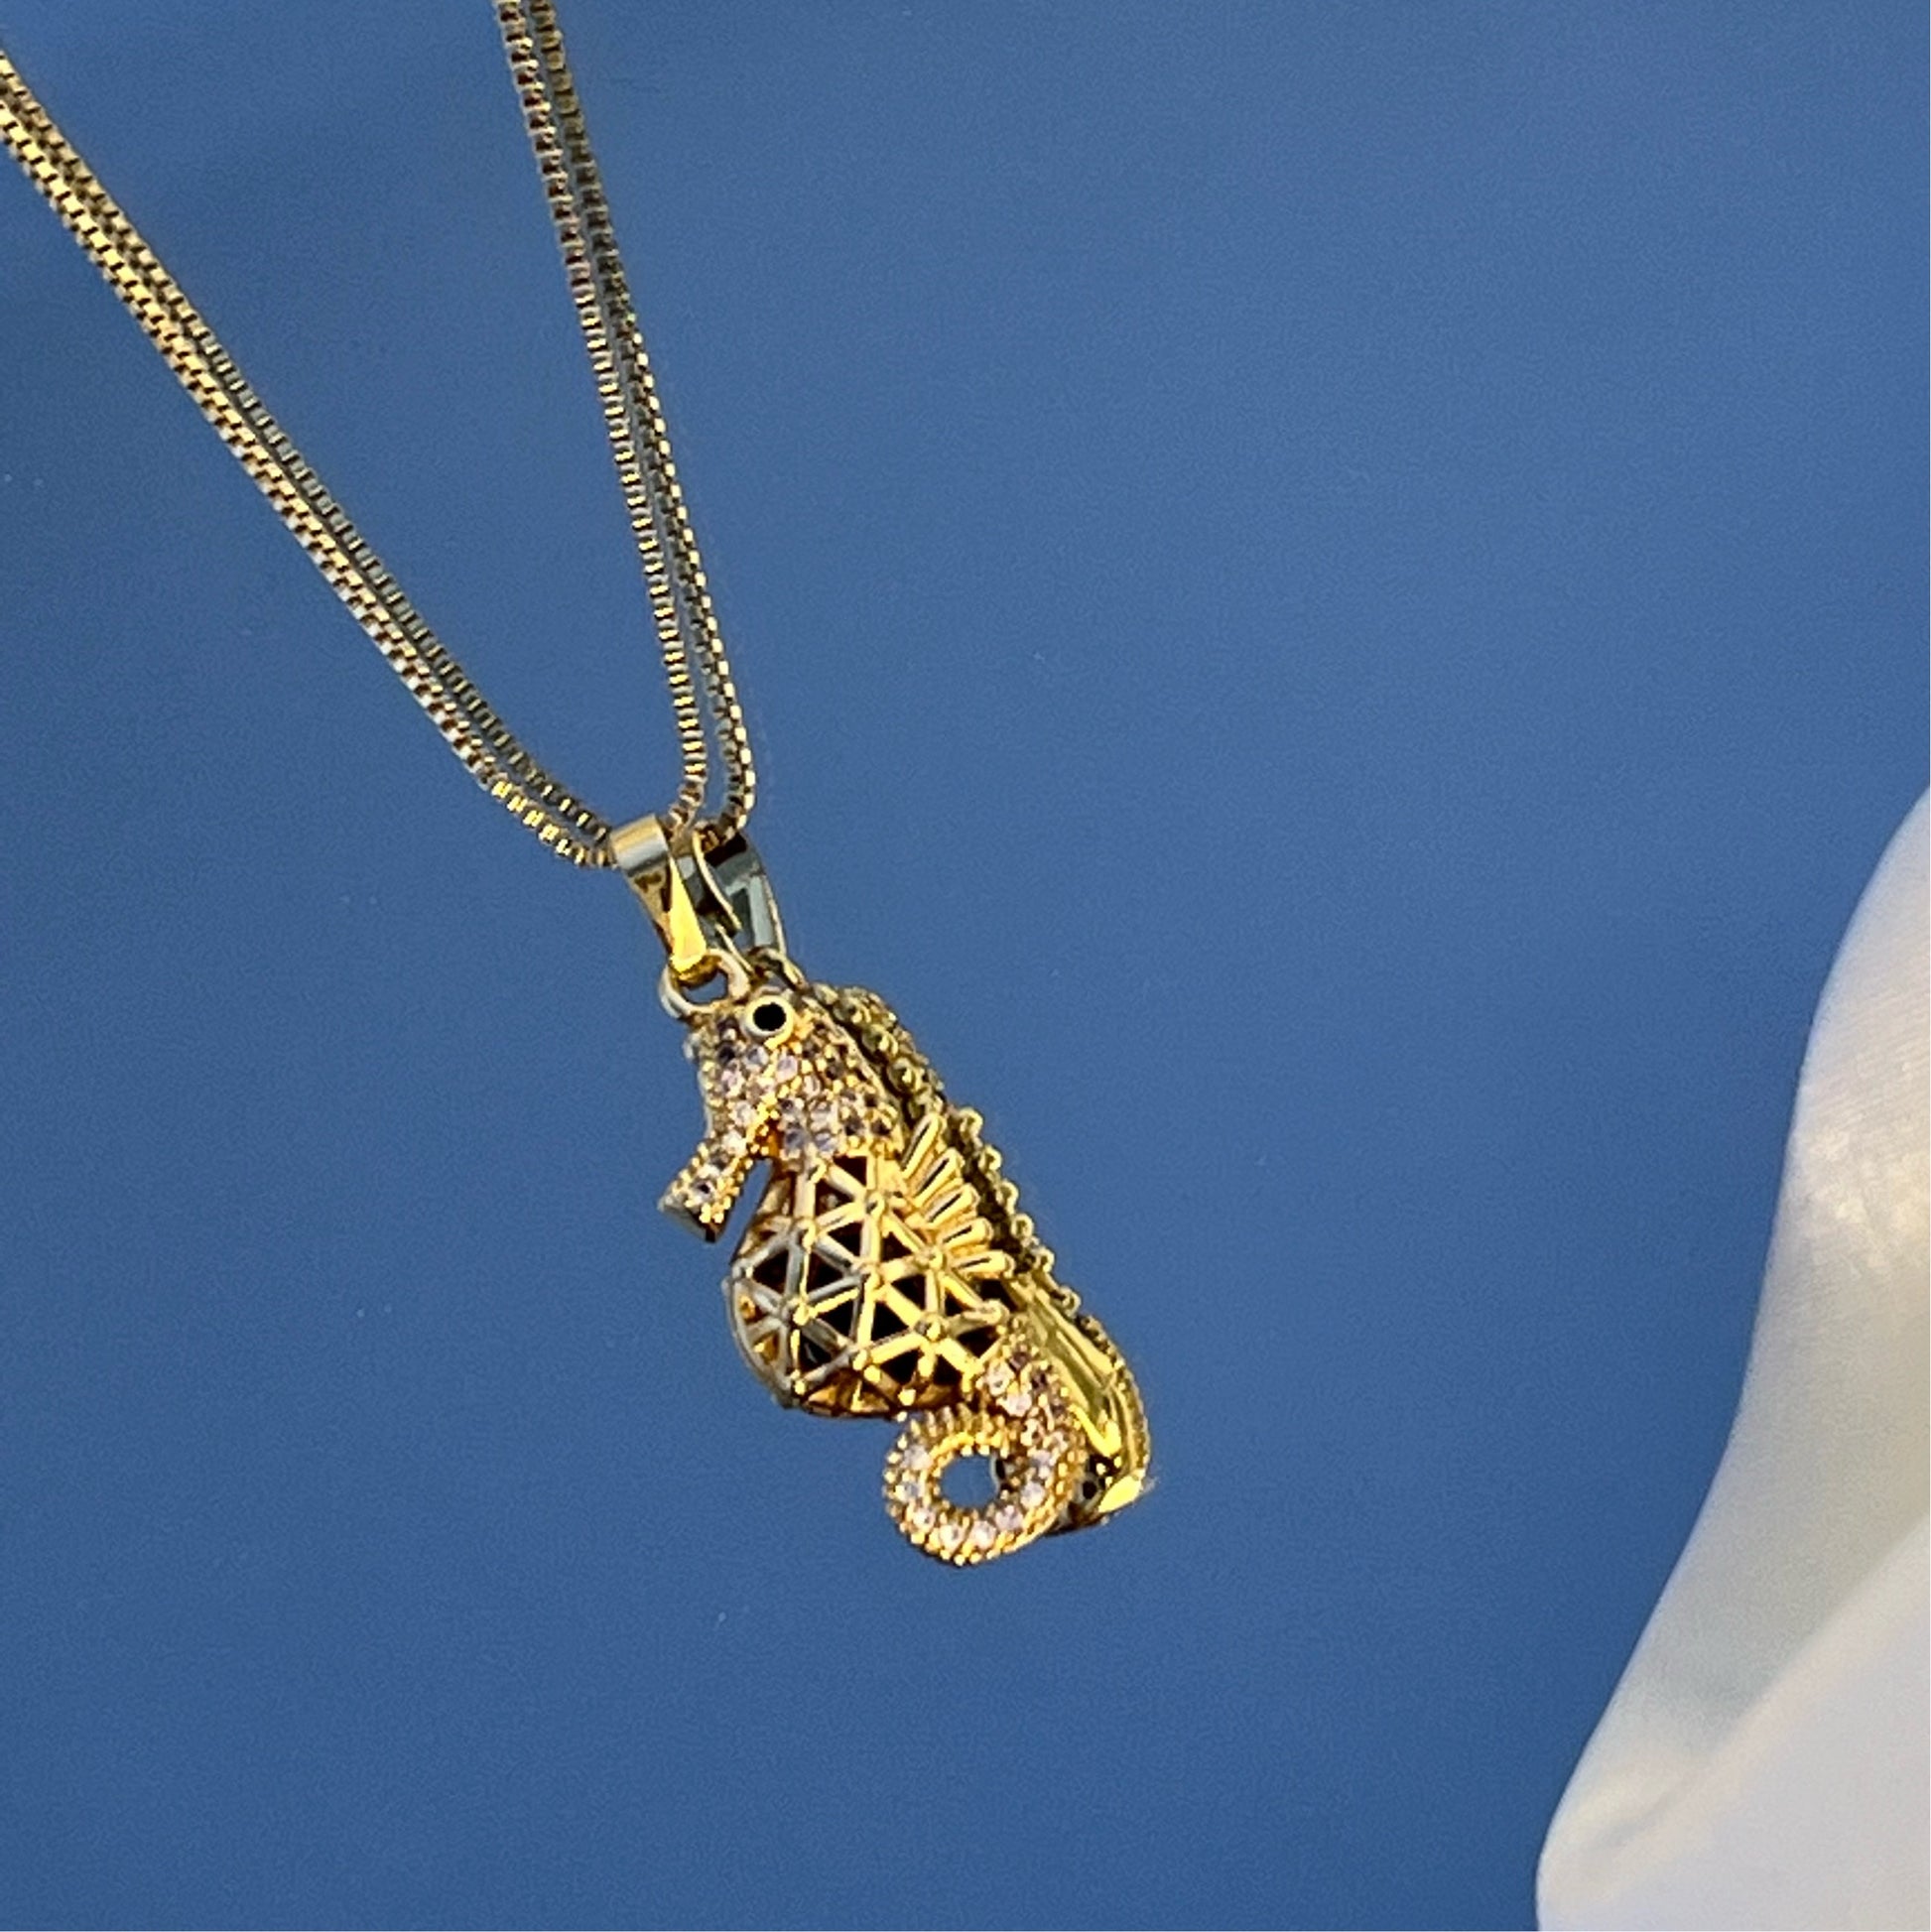 Seahorse 18K Gold Plated Zircon Pendant Necklace - PEACHY ACCESSORIES